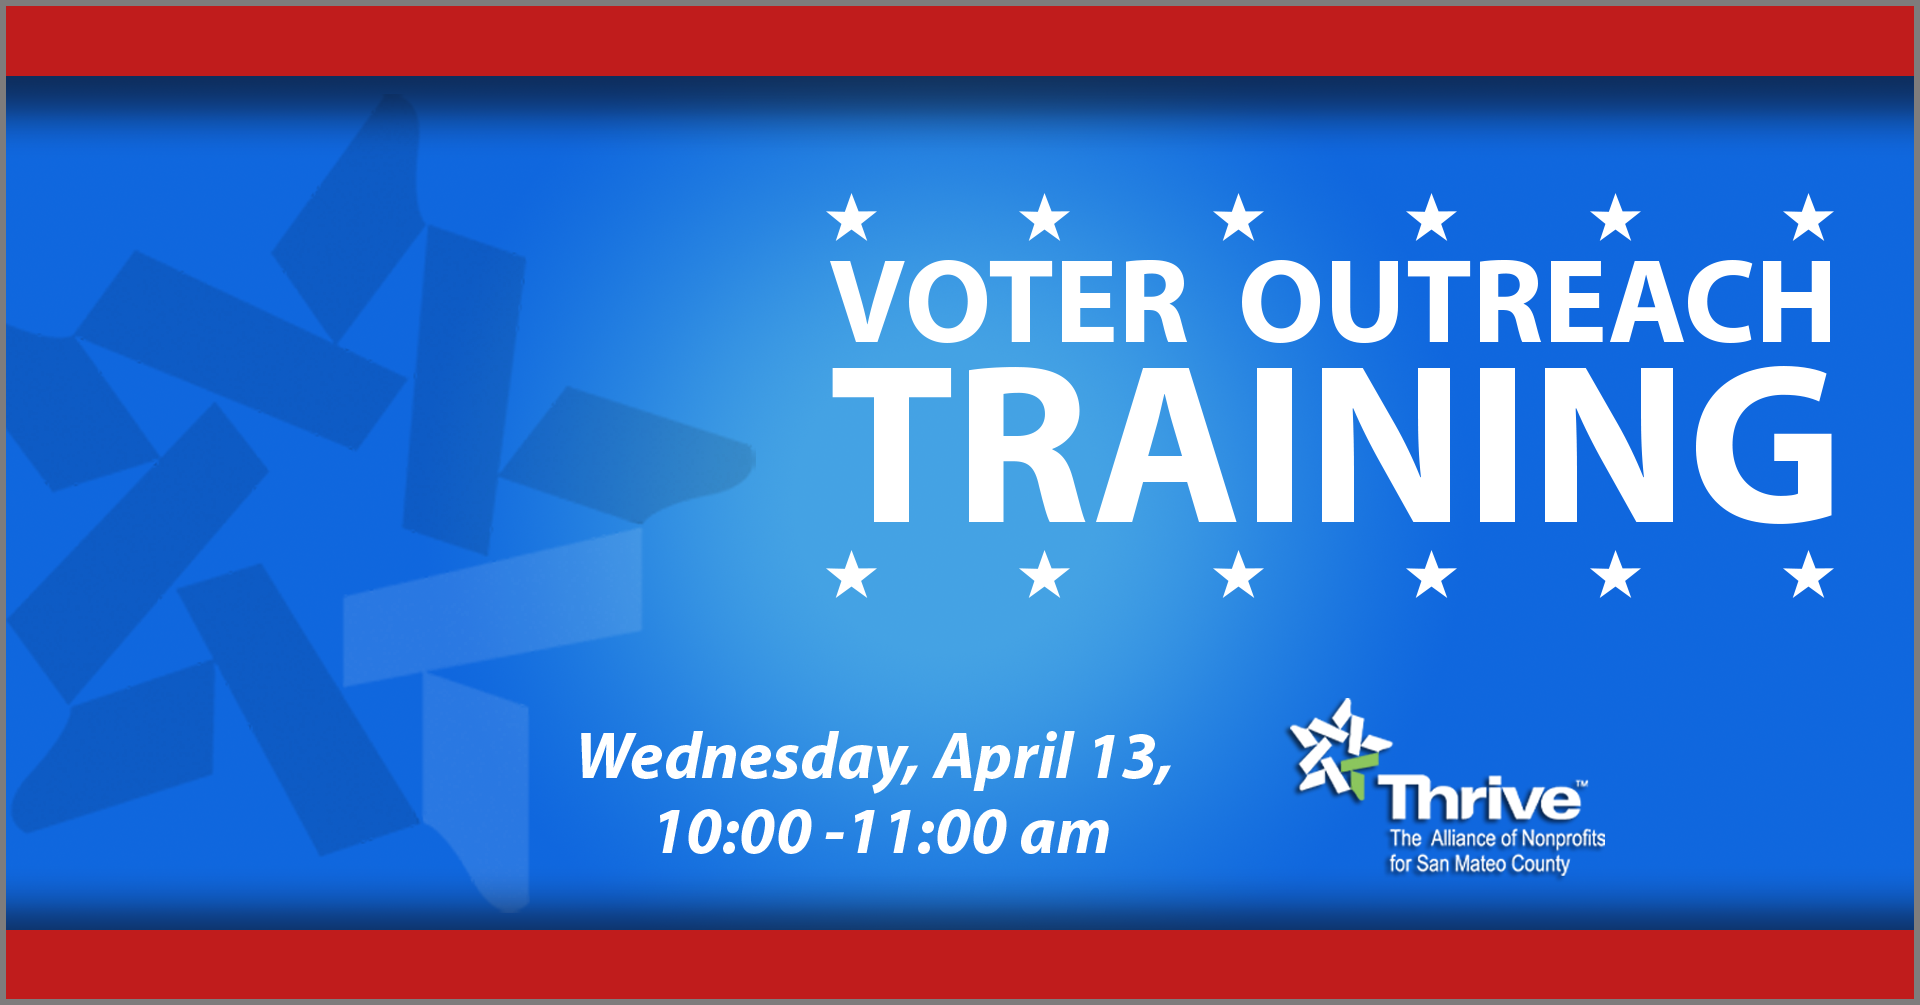 April 13, 2022: Voter Outreach Training